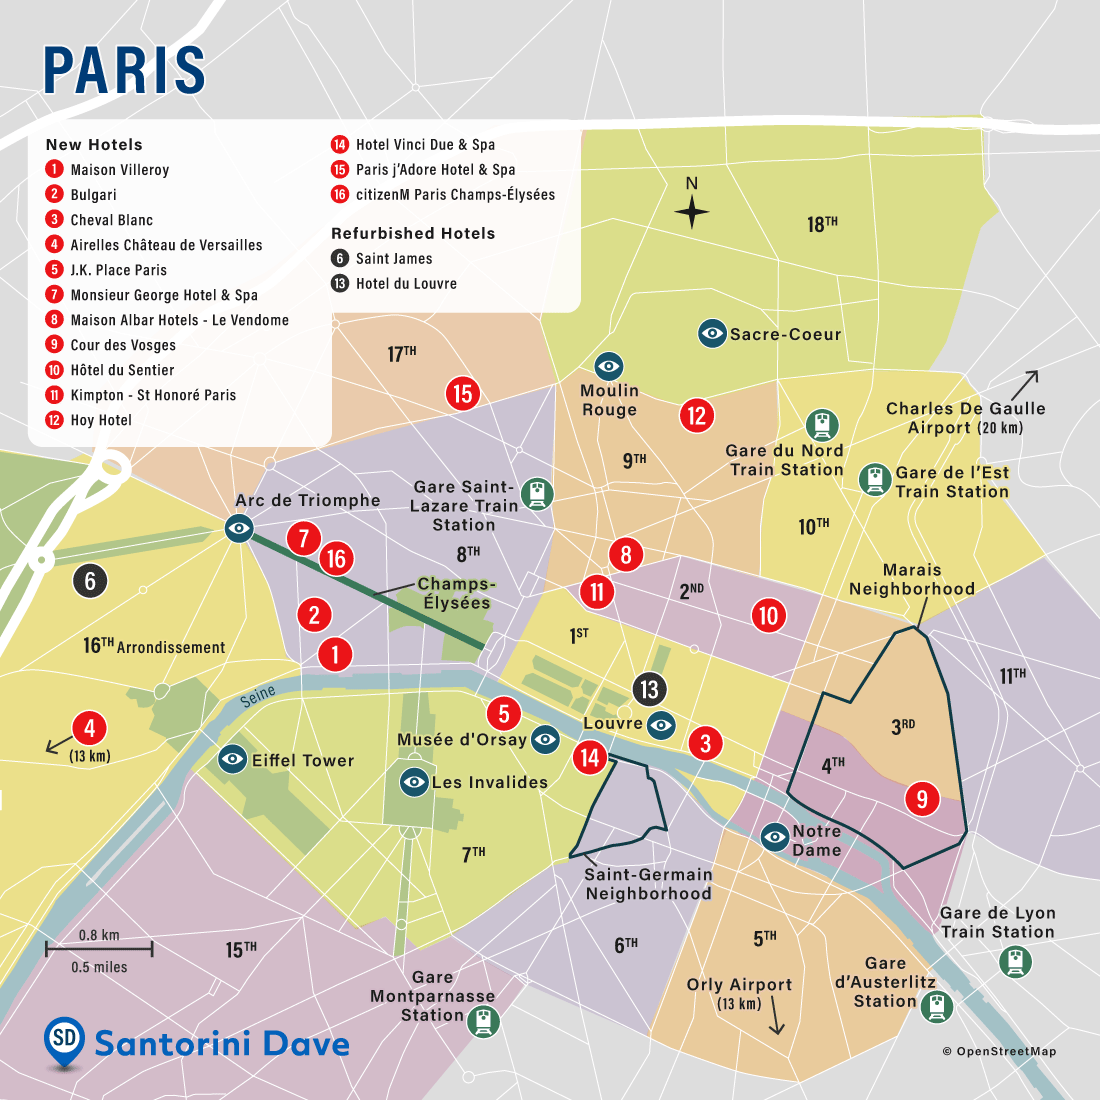 Map showing the locations of the best new hotels in Paris, France.